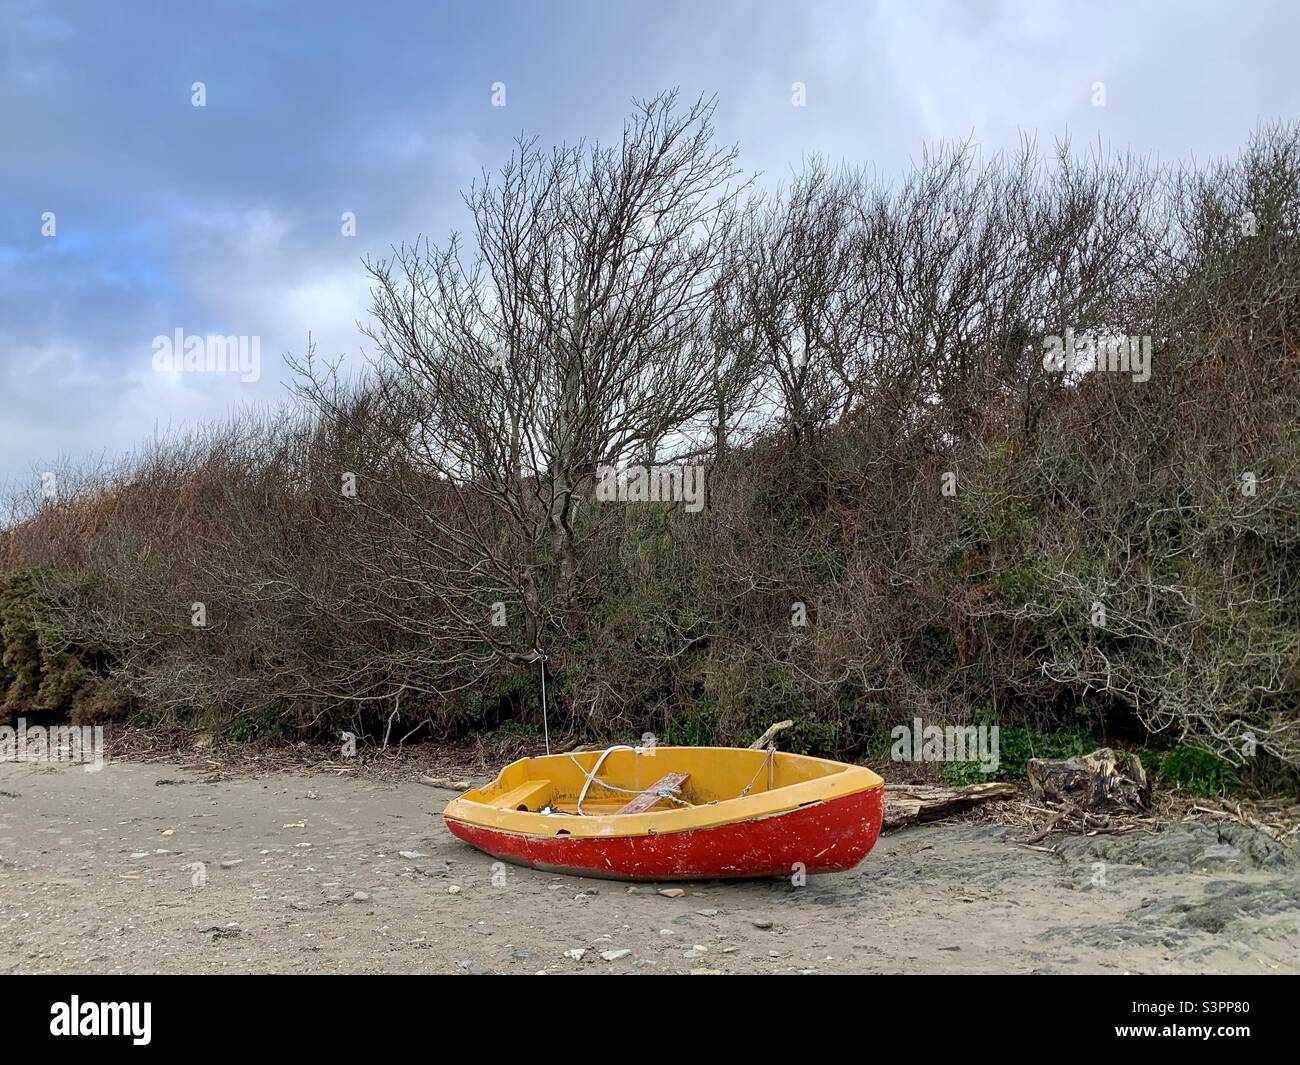 Red and yellow dinghy boat washed up onto beach Stock Photo